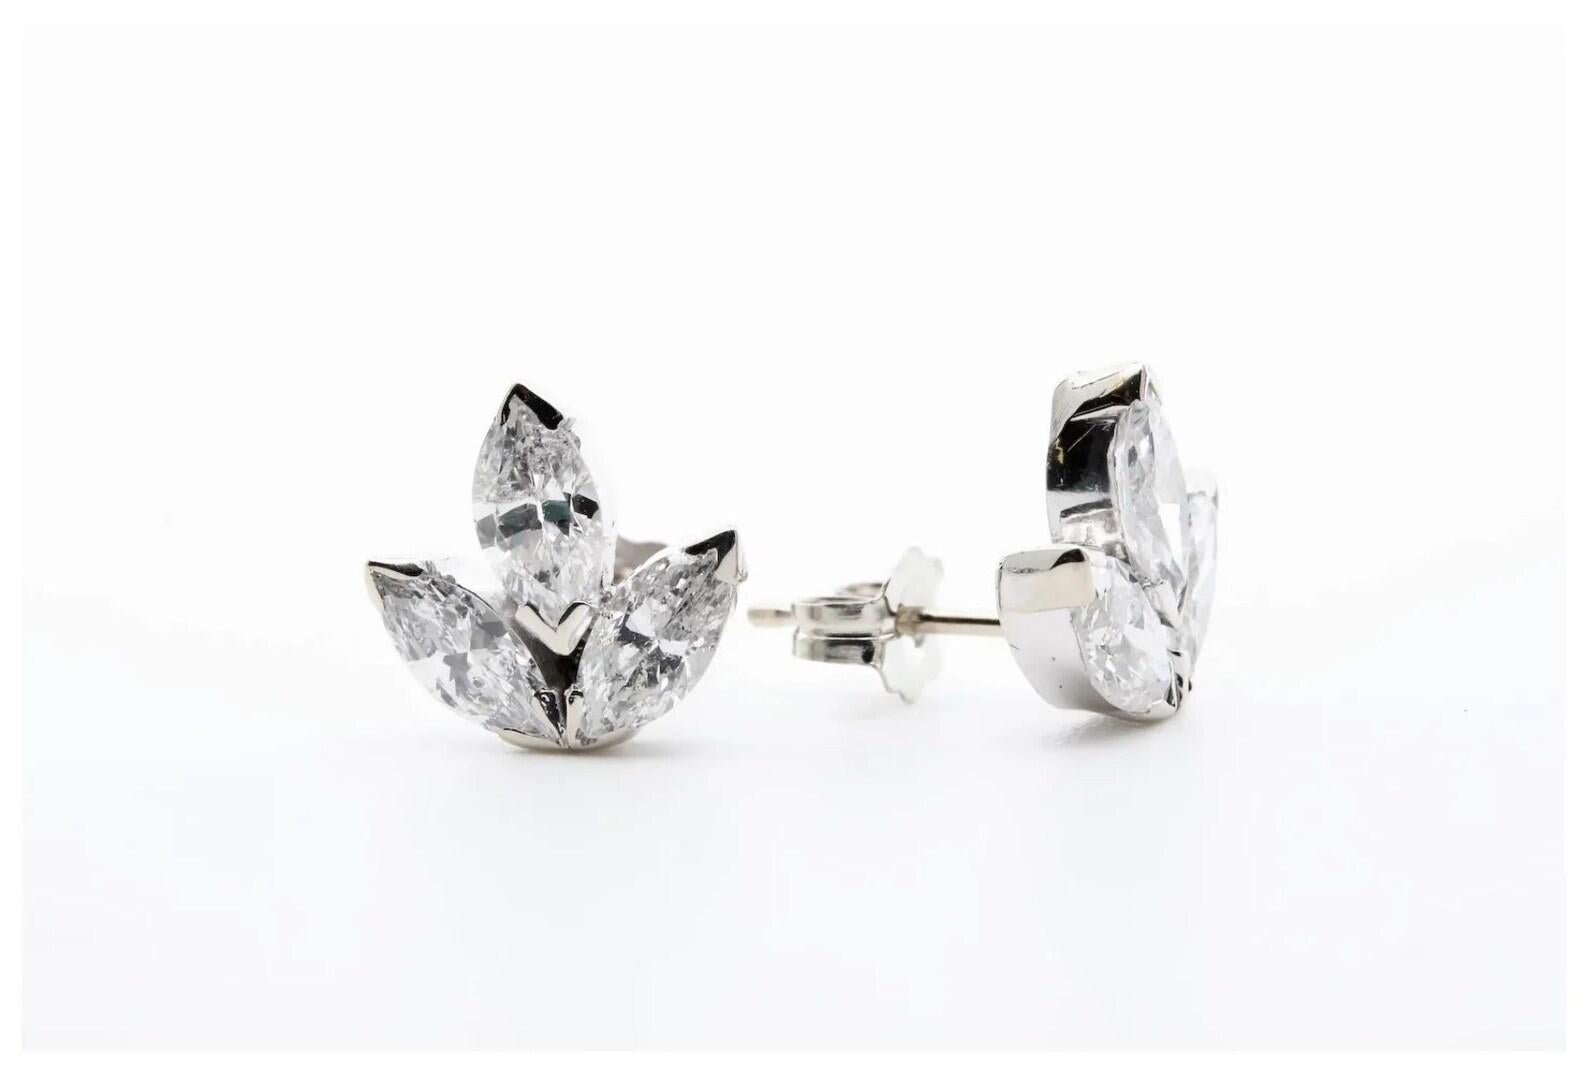 A pair of mid century three pointed leaf shaped diamond studs set in 14 karat white gold. Each set with a 0.25 carat marquise shaped diamond weighing a combined 1.50ctw. The diamonds grade as H color, VS2 clarity.

Earrings measure 10mm in height